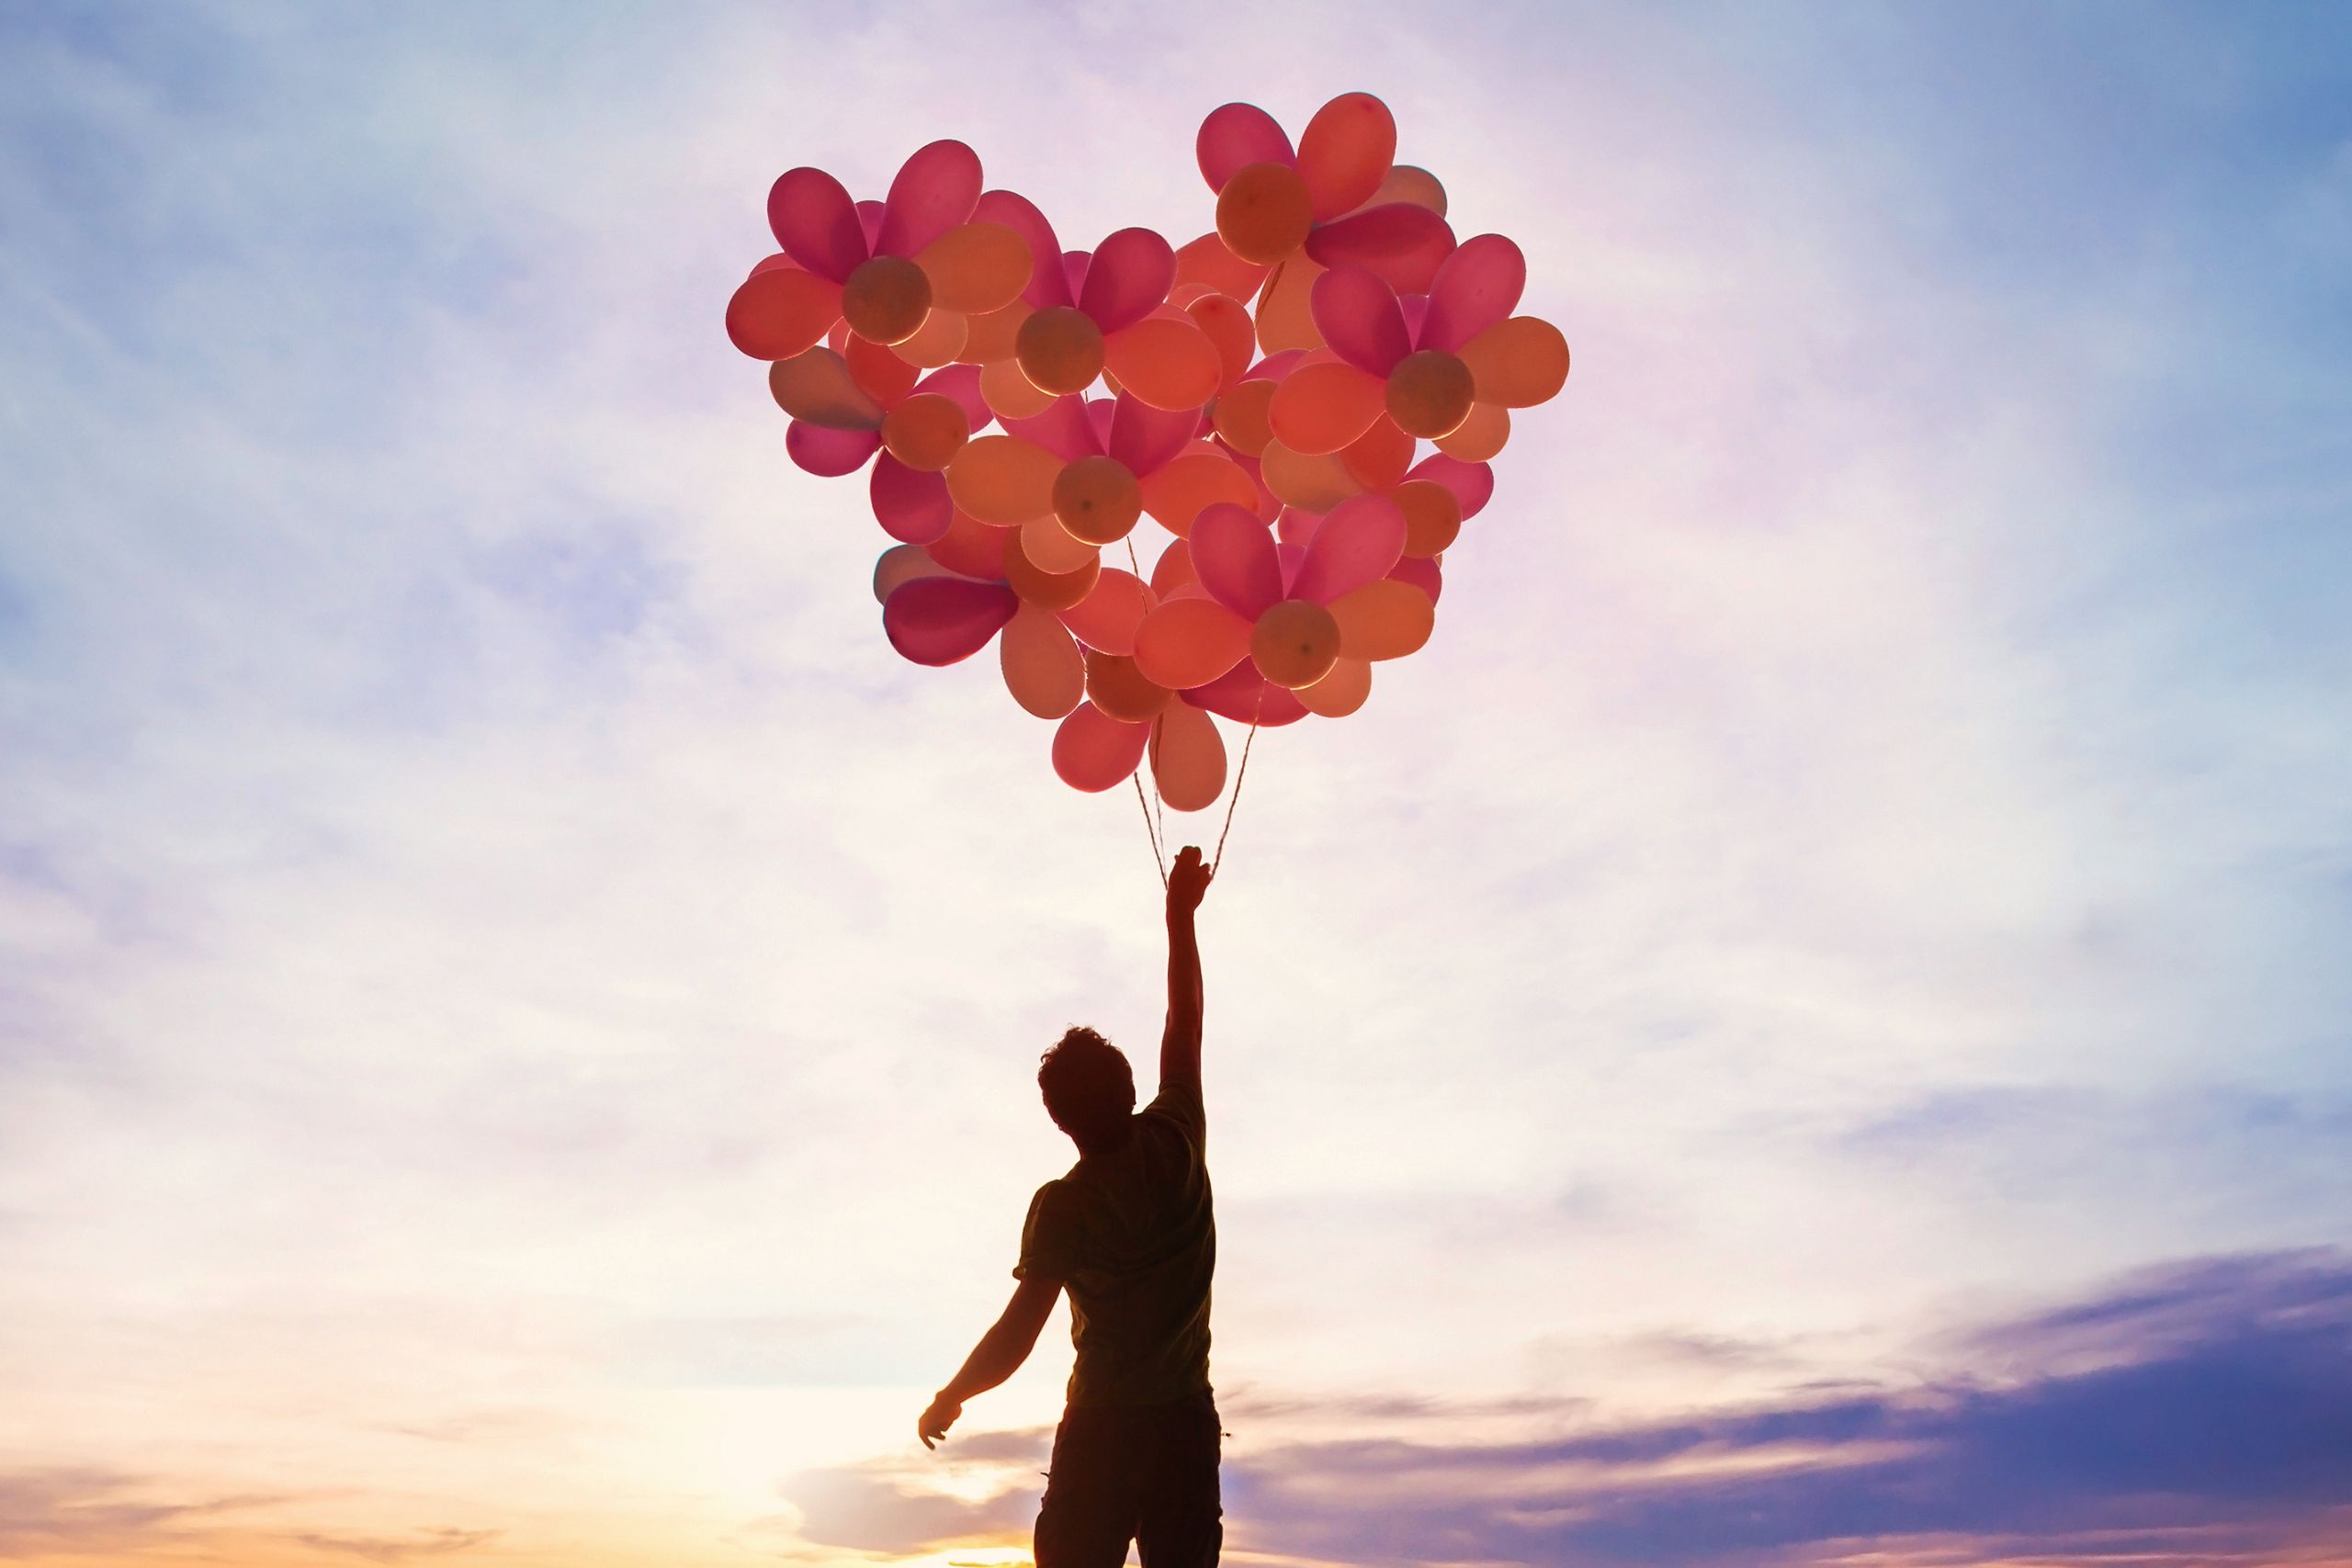 This is a photo of a person at sunset holding a bunch of balloons which make up a heart shape. It is the header image for the Urostomy Association's Help provide hope appeal page